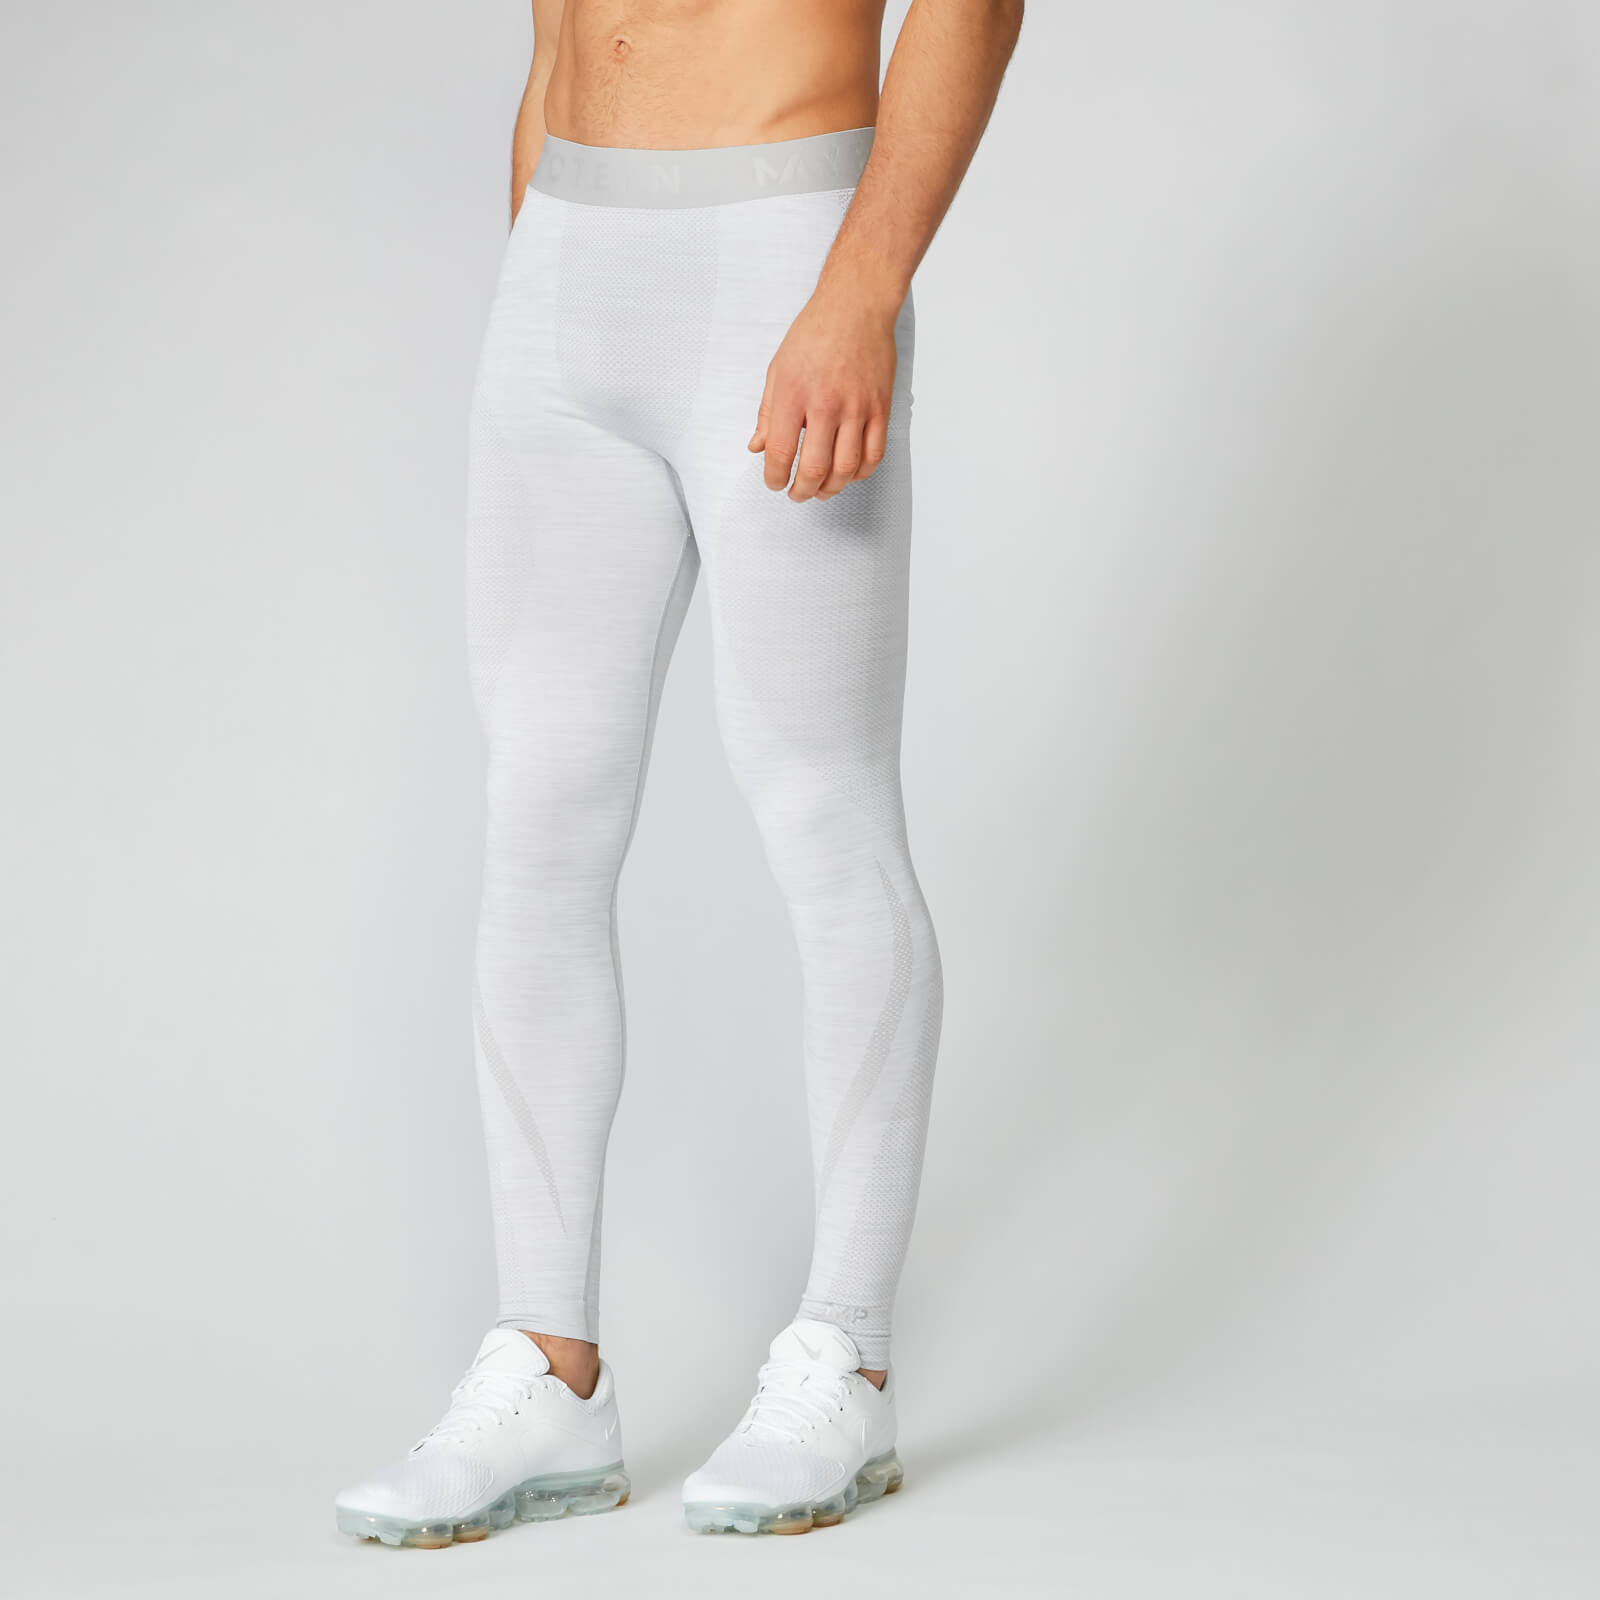 Seamless Tights - Silver - S